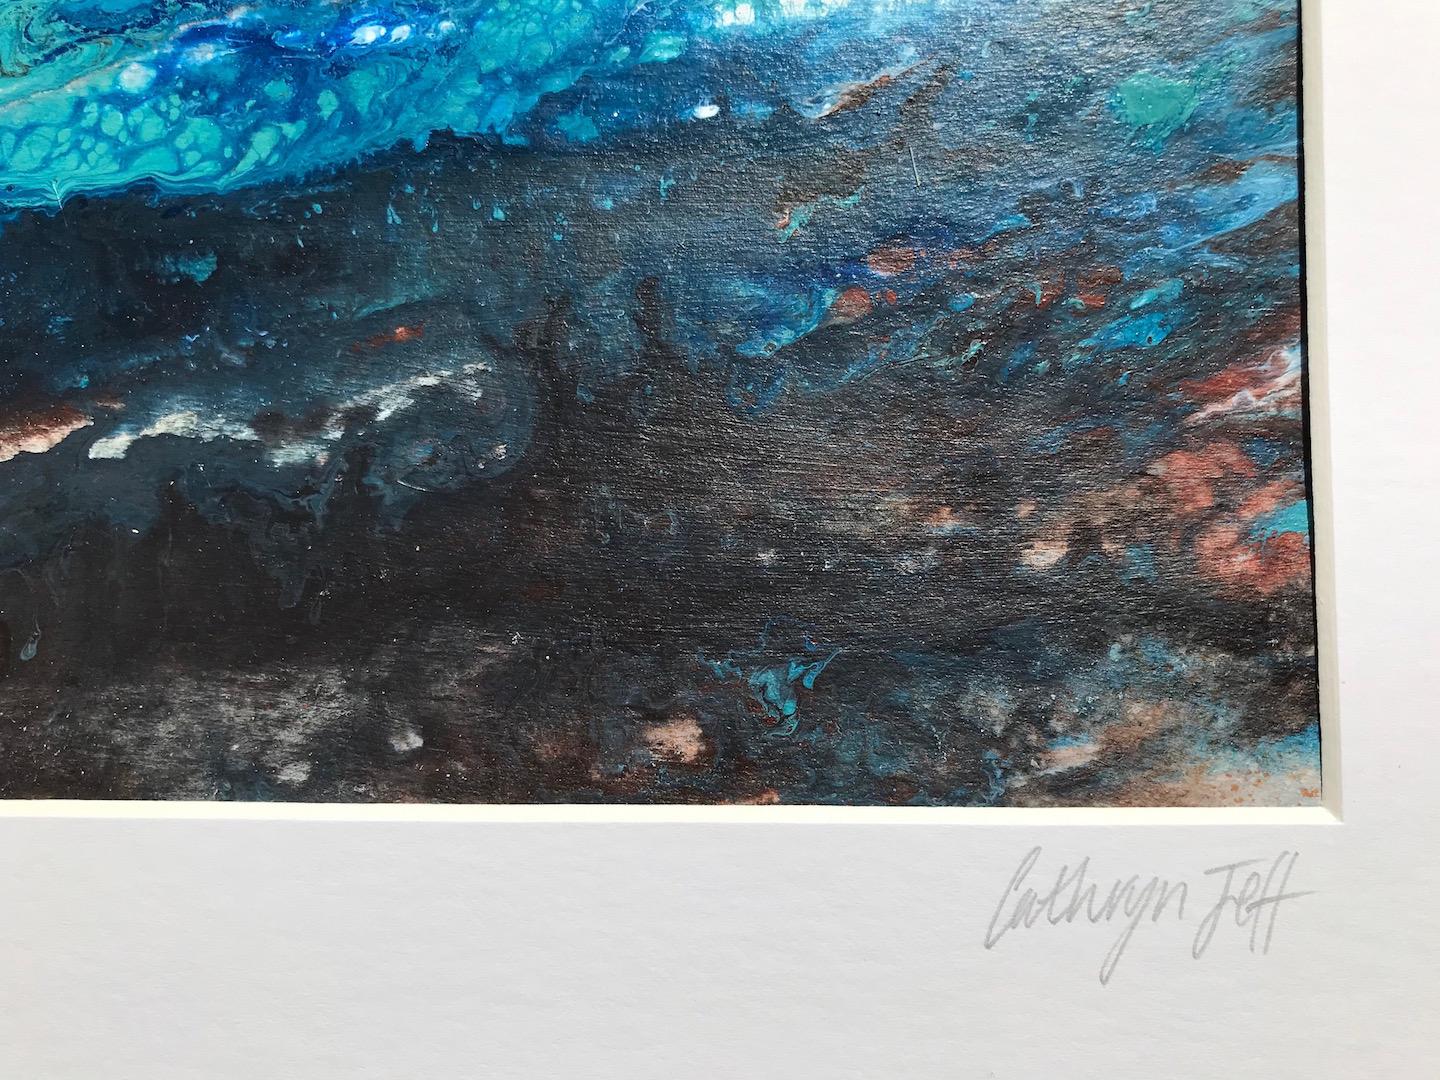 Cathryn Jeff
Sea Swell
Original Mixed Media Painting on board with white mount
Painting Size: 20 cm x 29 cm
Mount Size: 40.5 cm x 51 cm
Sold Unframed

Please note that in situ images are purely an indication of how a piece may look.

Sea Swell is an